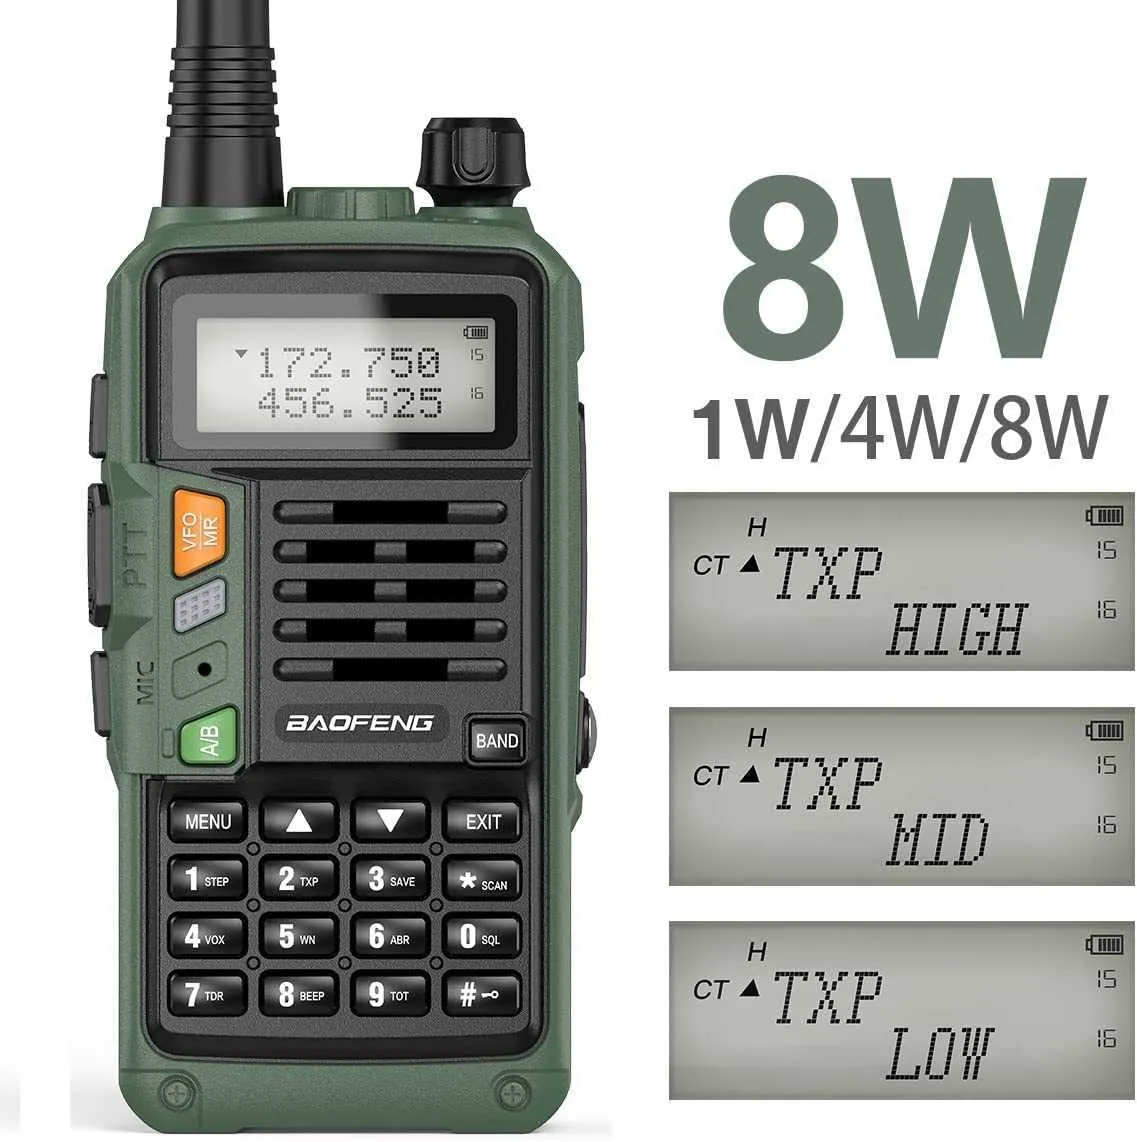 Baofeng UV S9 Plus 8W Handheld Radio Portable, High Powered, Interphone,  2200mAh Battery, USB Charger Cable Ideal For Camping, Hiking, Travel, And  More! From Goodtom, $61.93